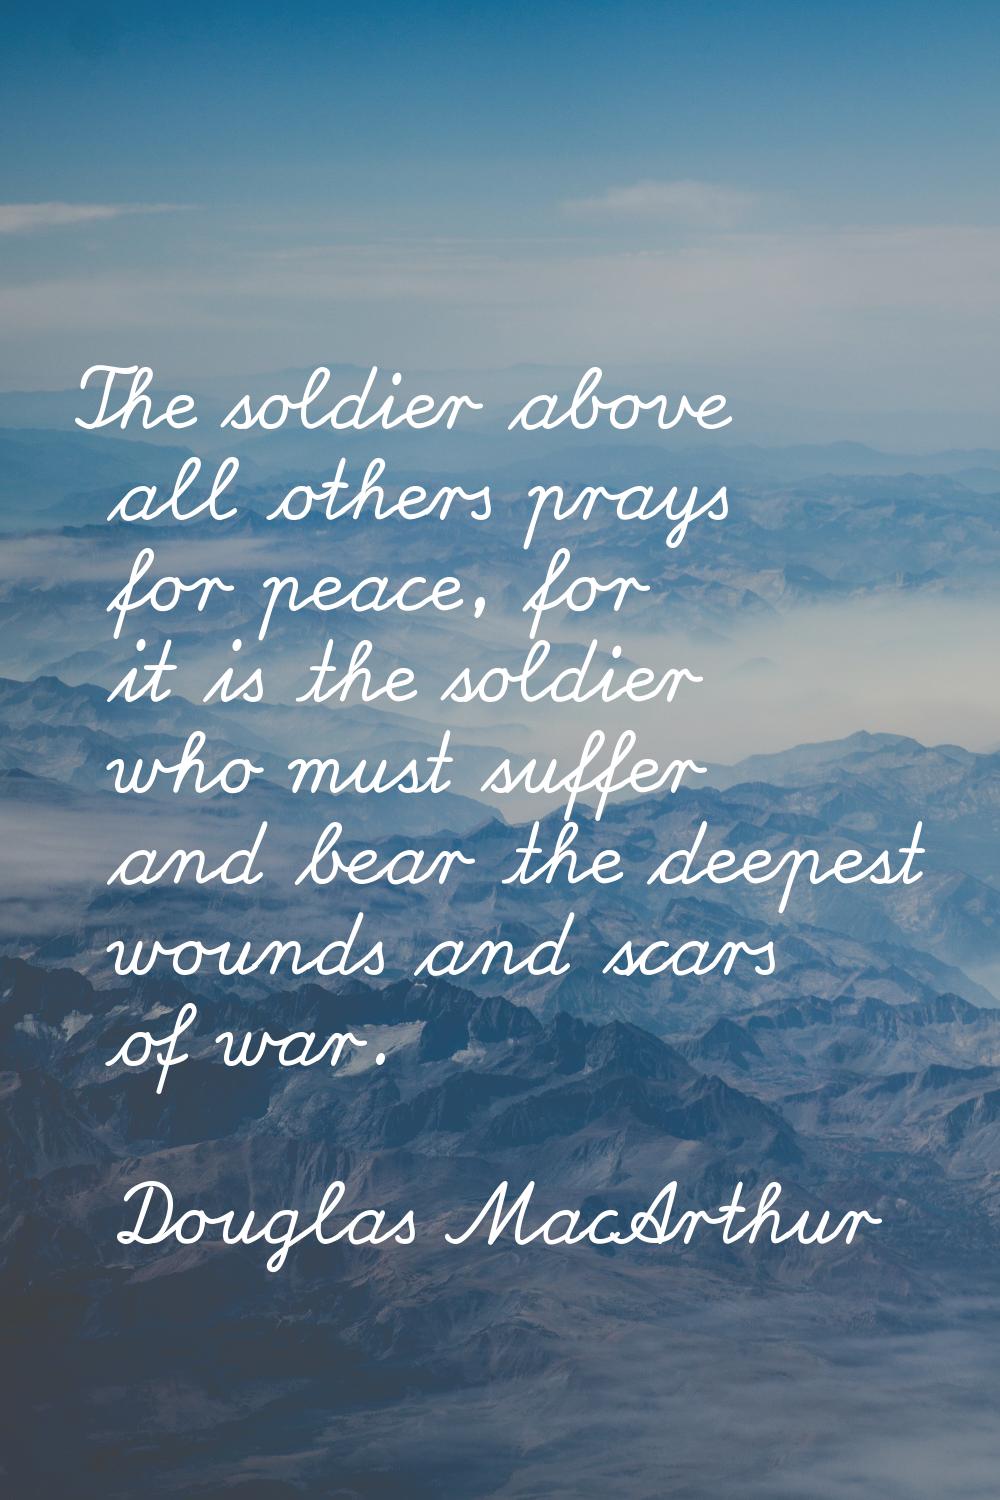 The soldier above all others prays for peace, for it is the soldier who must suffer and bear the de